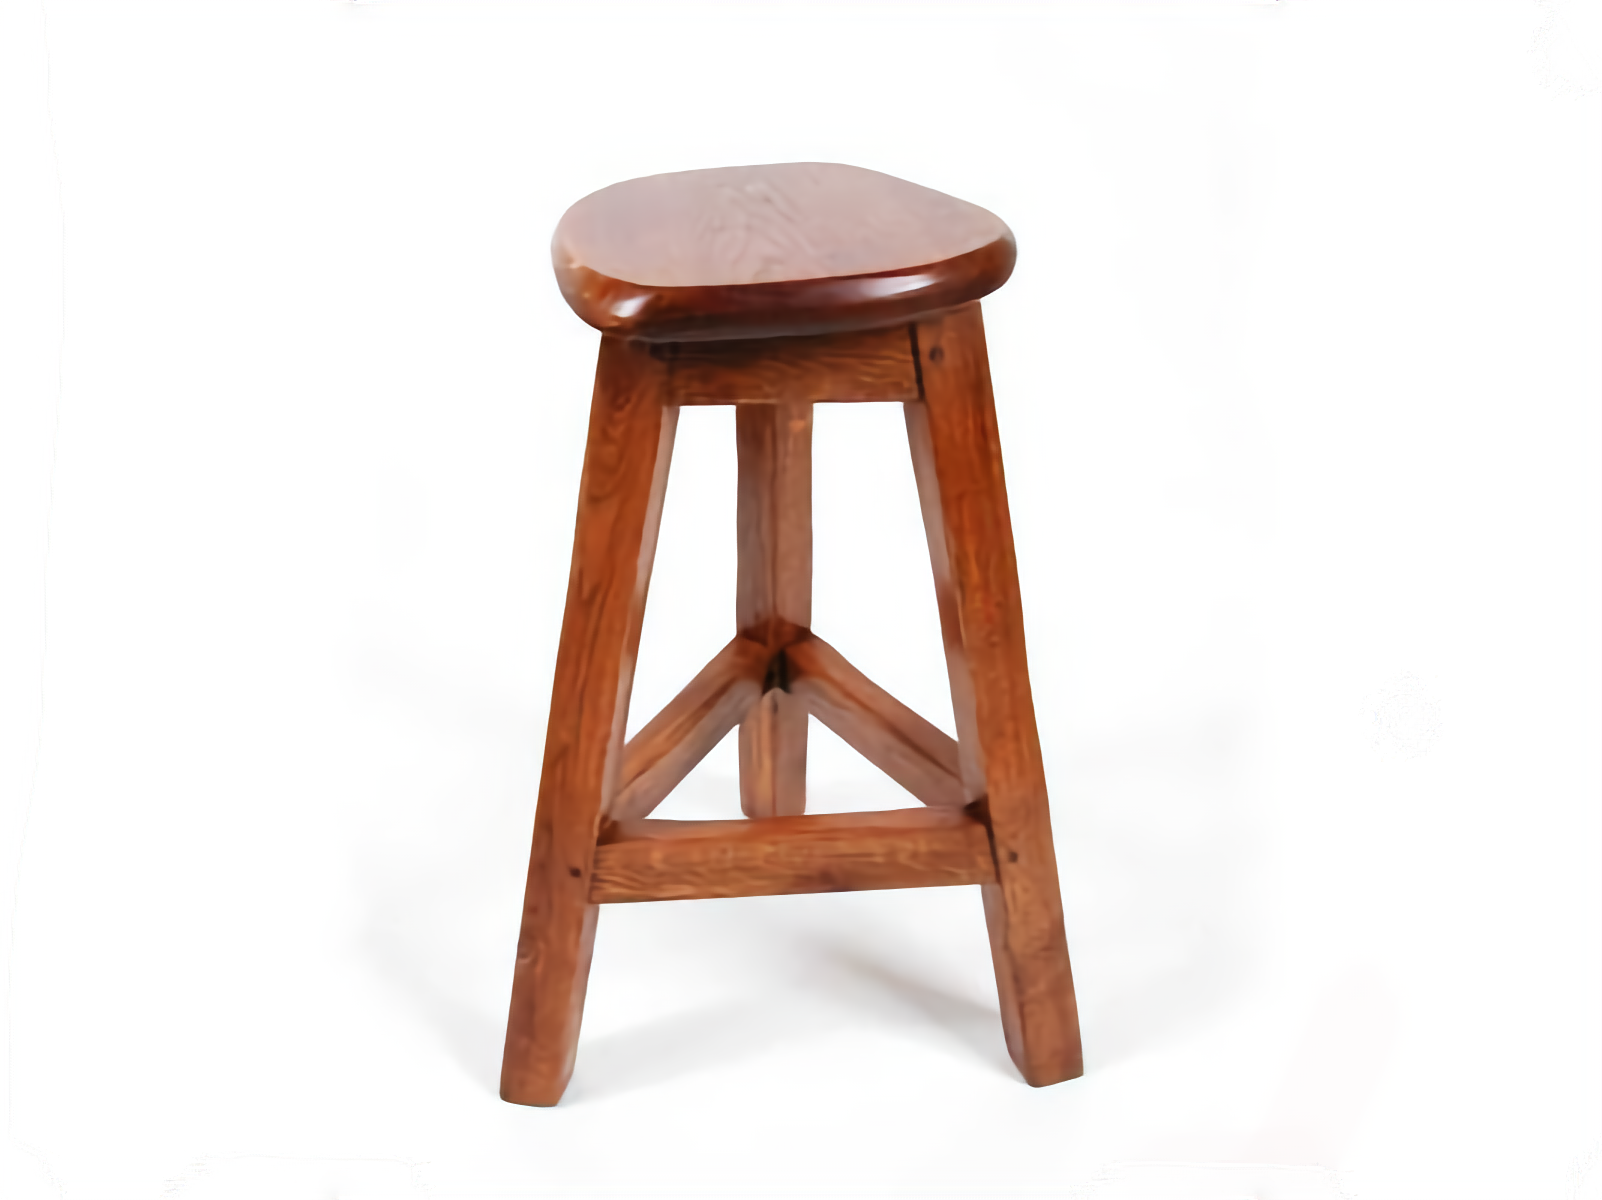 A kitchen stool is an example of a frame.